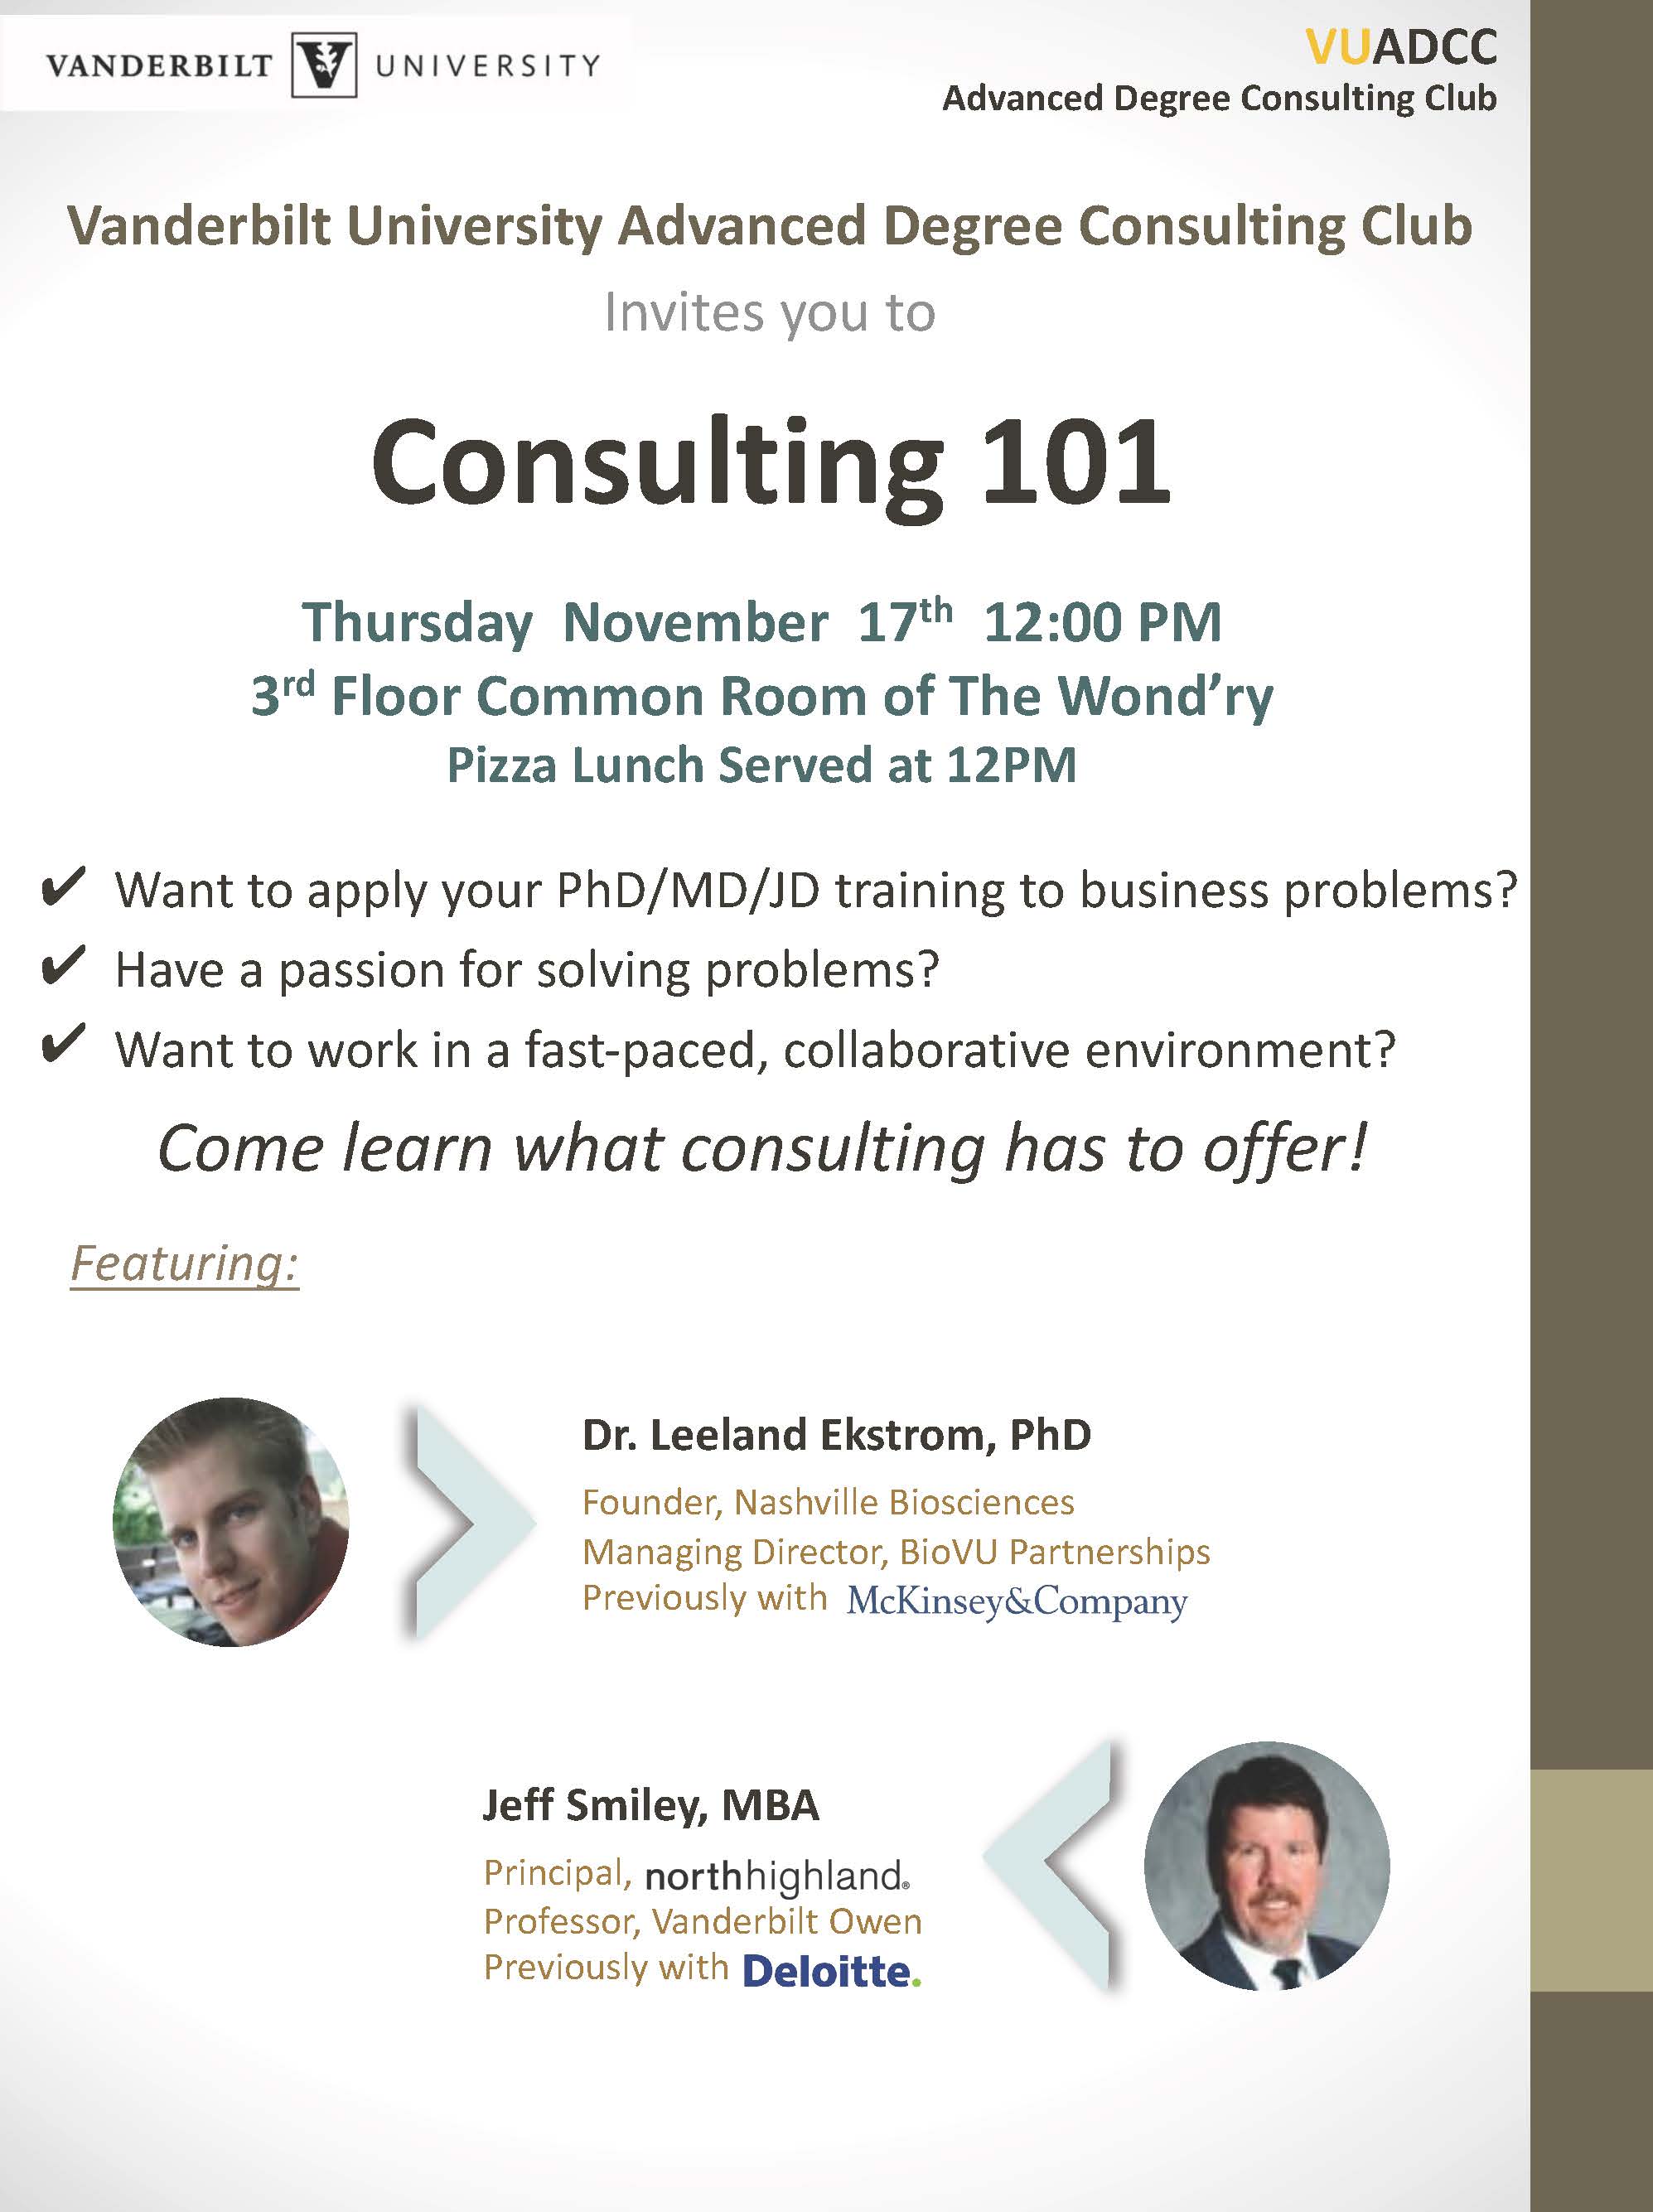 VUADCC_Consulting101Workshop_20161117.jpg